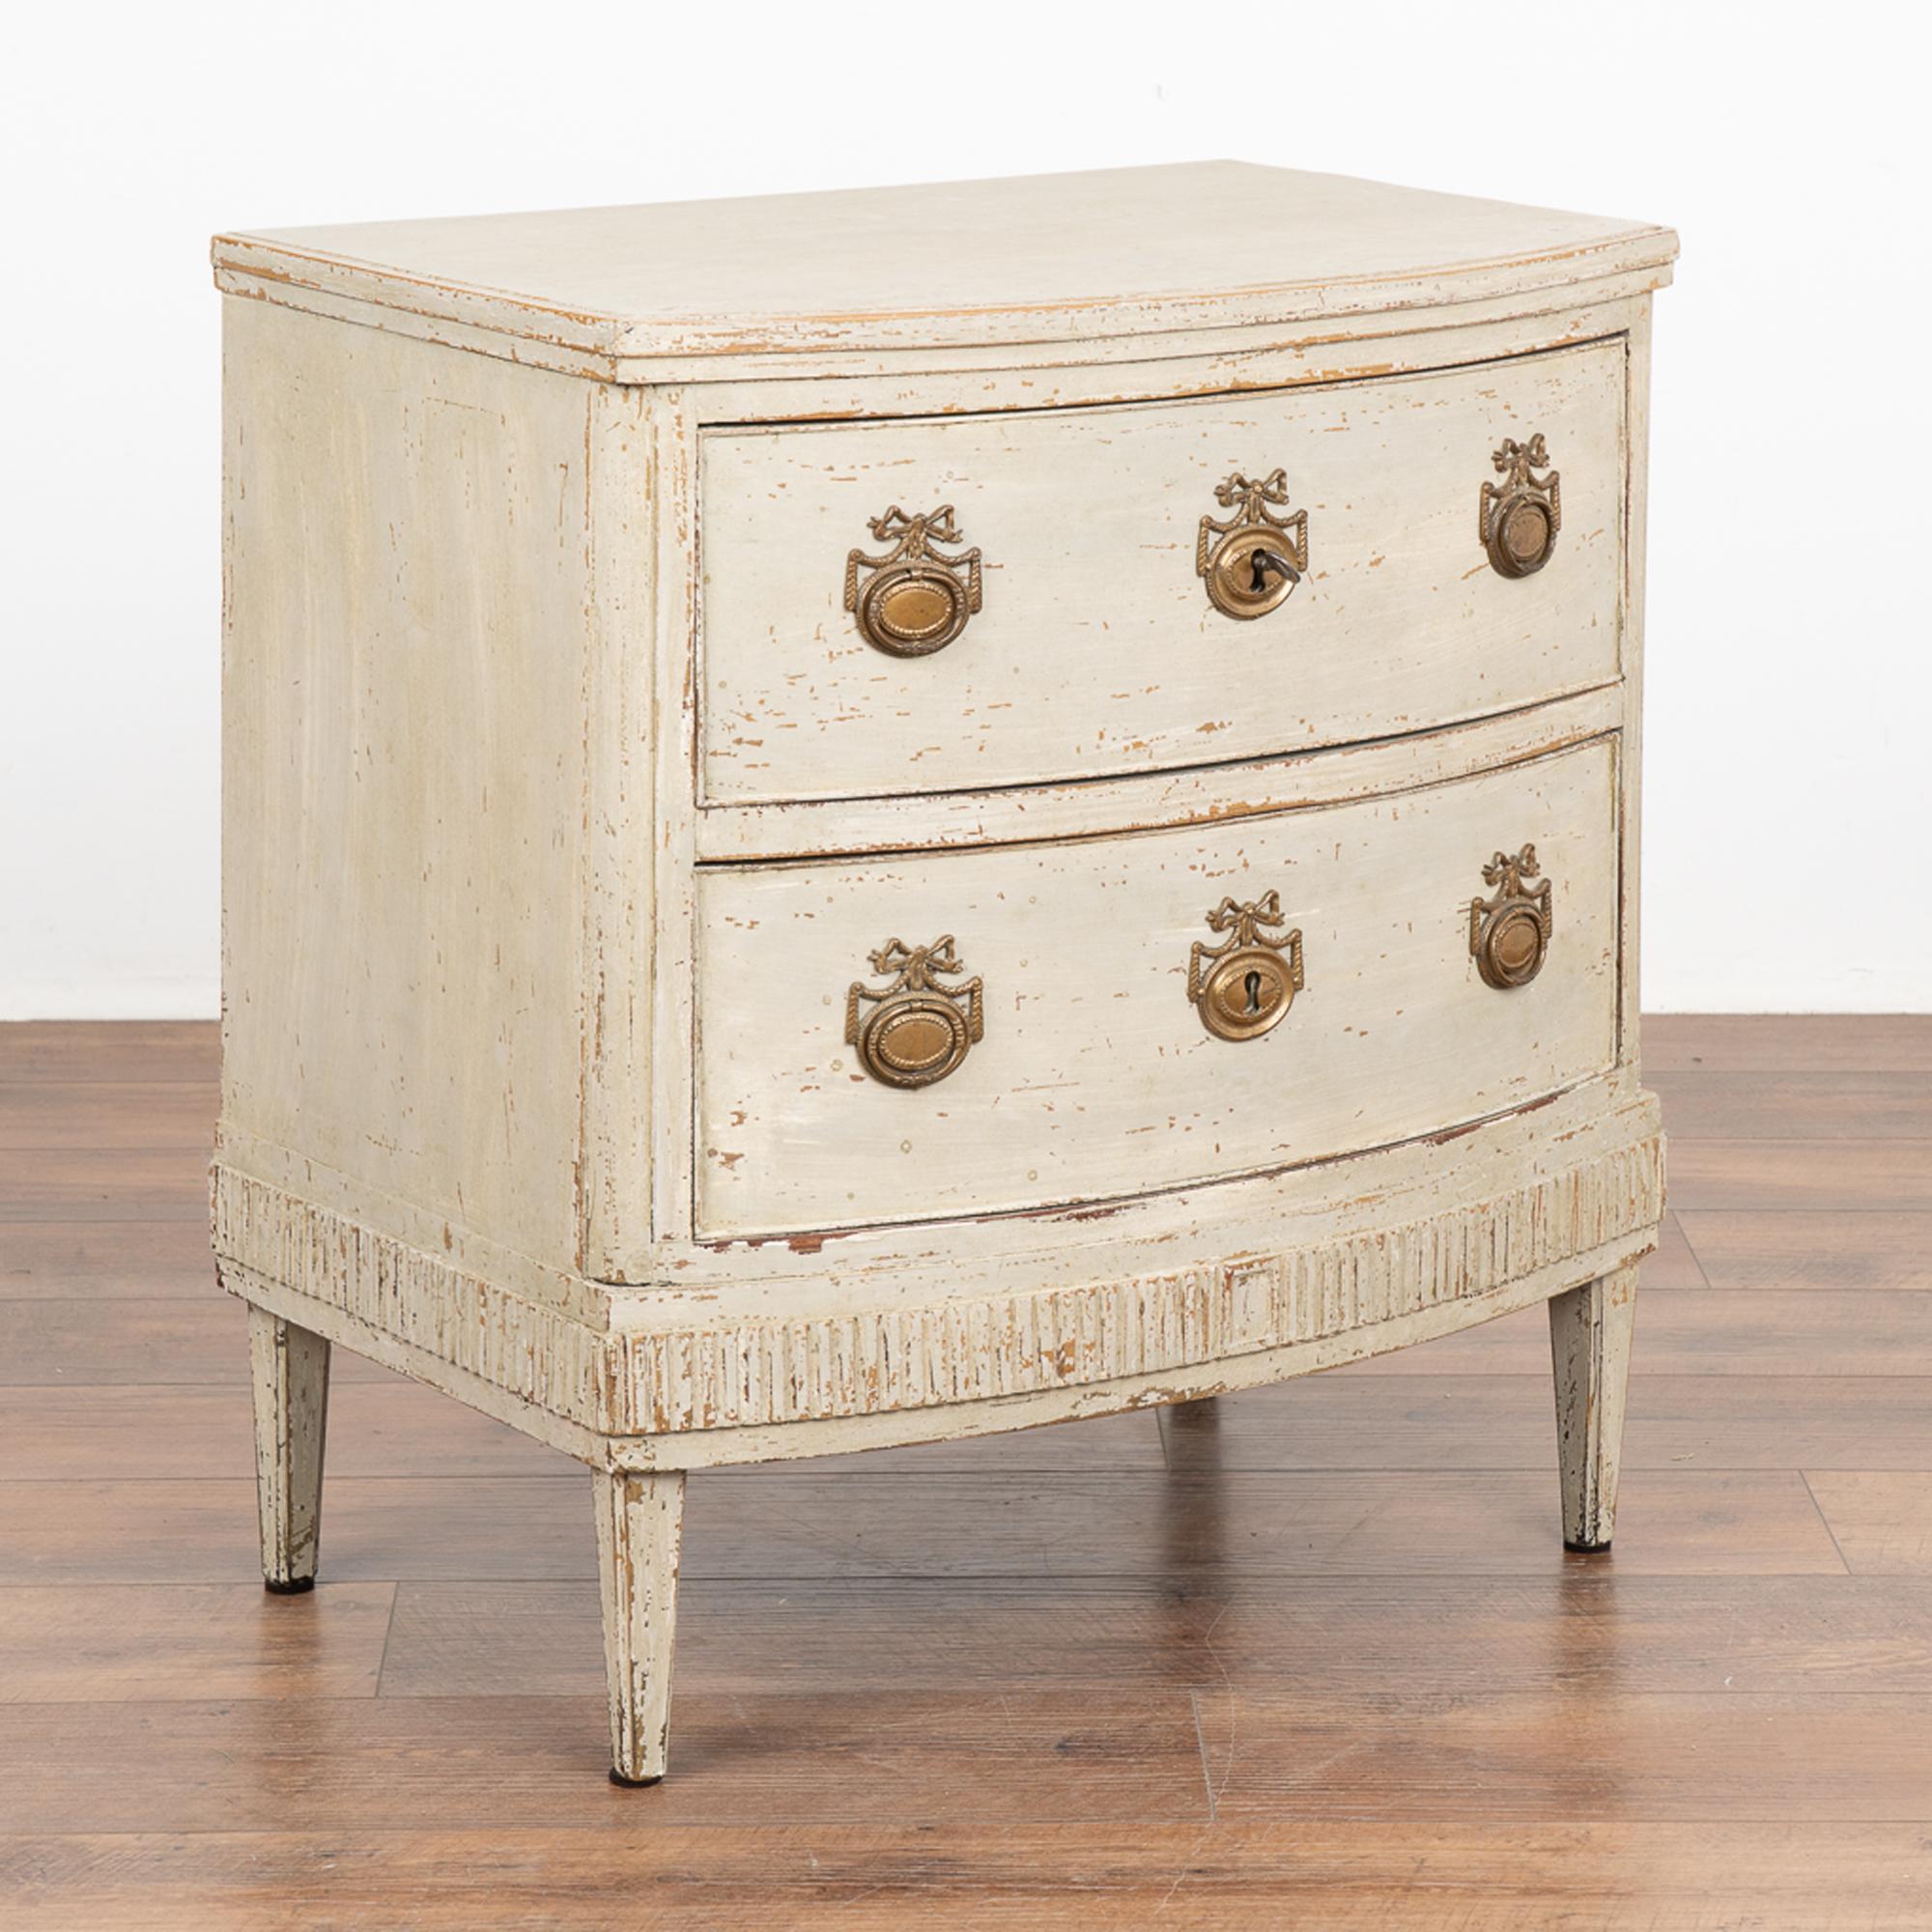 This small chest of drawers is quite dramatic thanks to the bow front and fluted carving along the skirt. Rests on tapered feet.
Restored, later professionally painted in layered shades of white and lightly distressed to fit the age and grace of